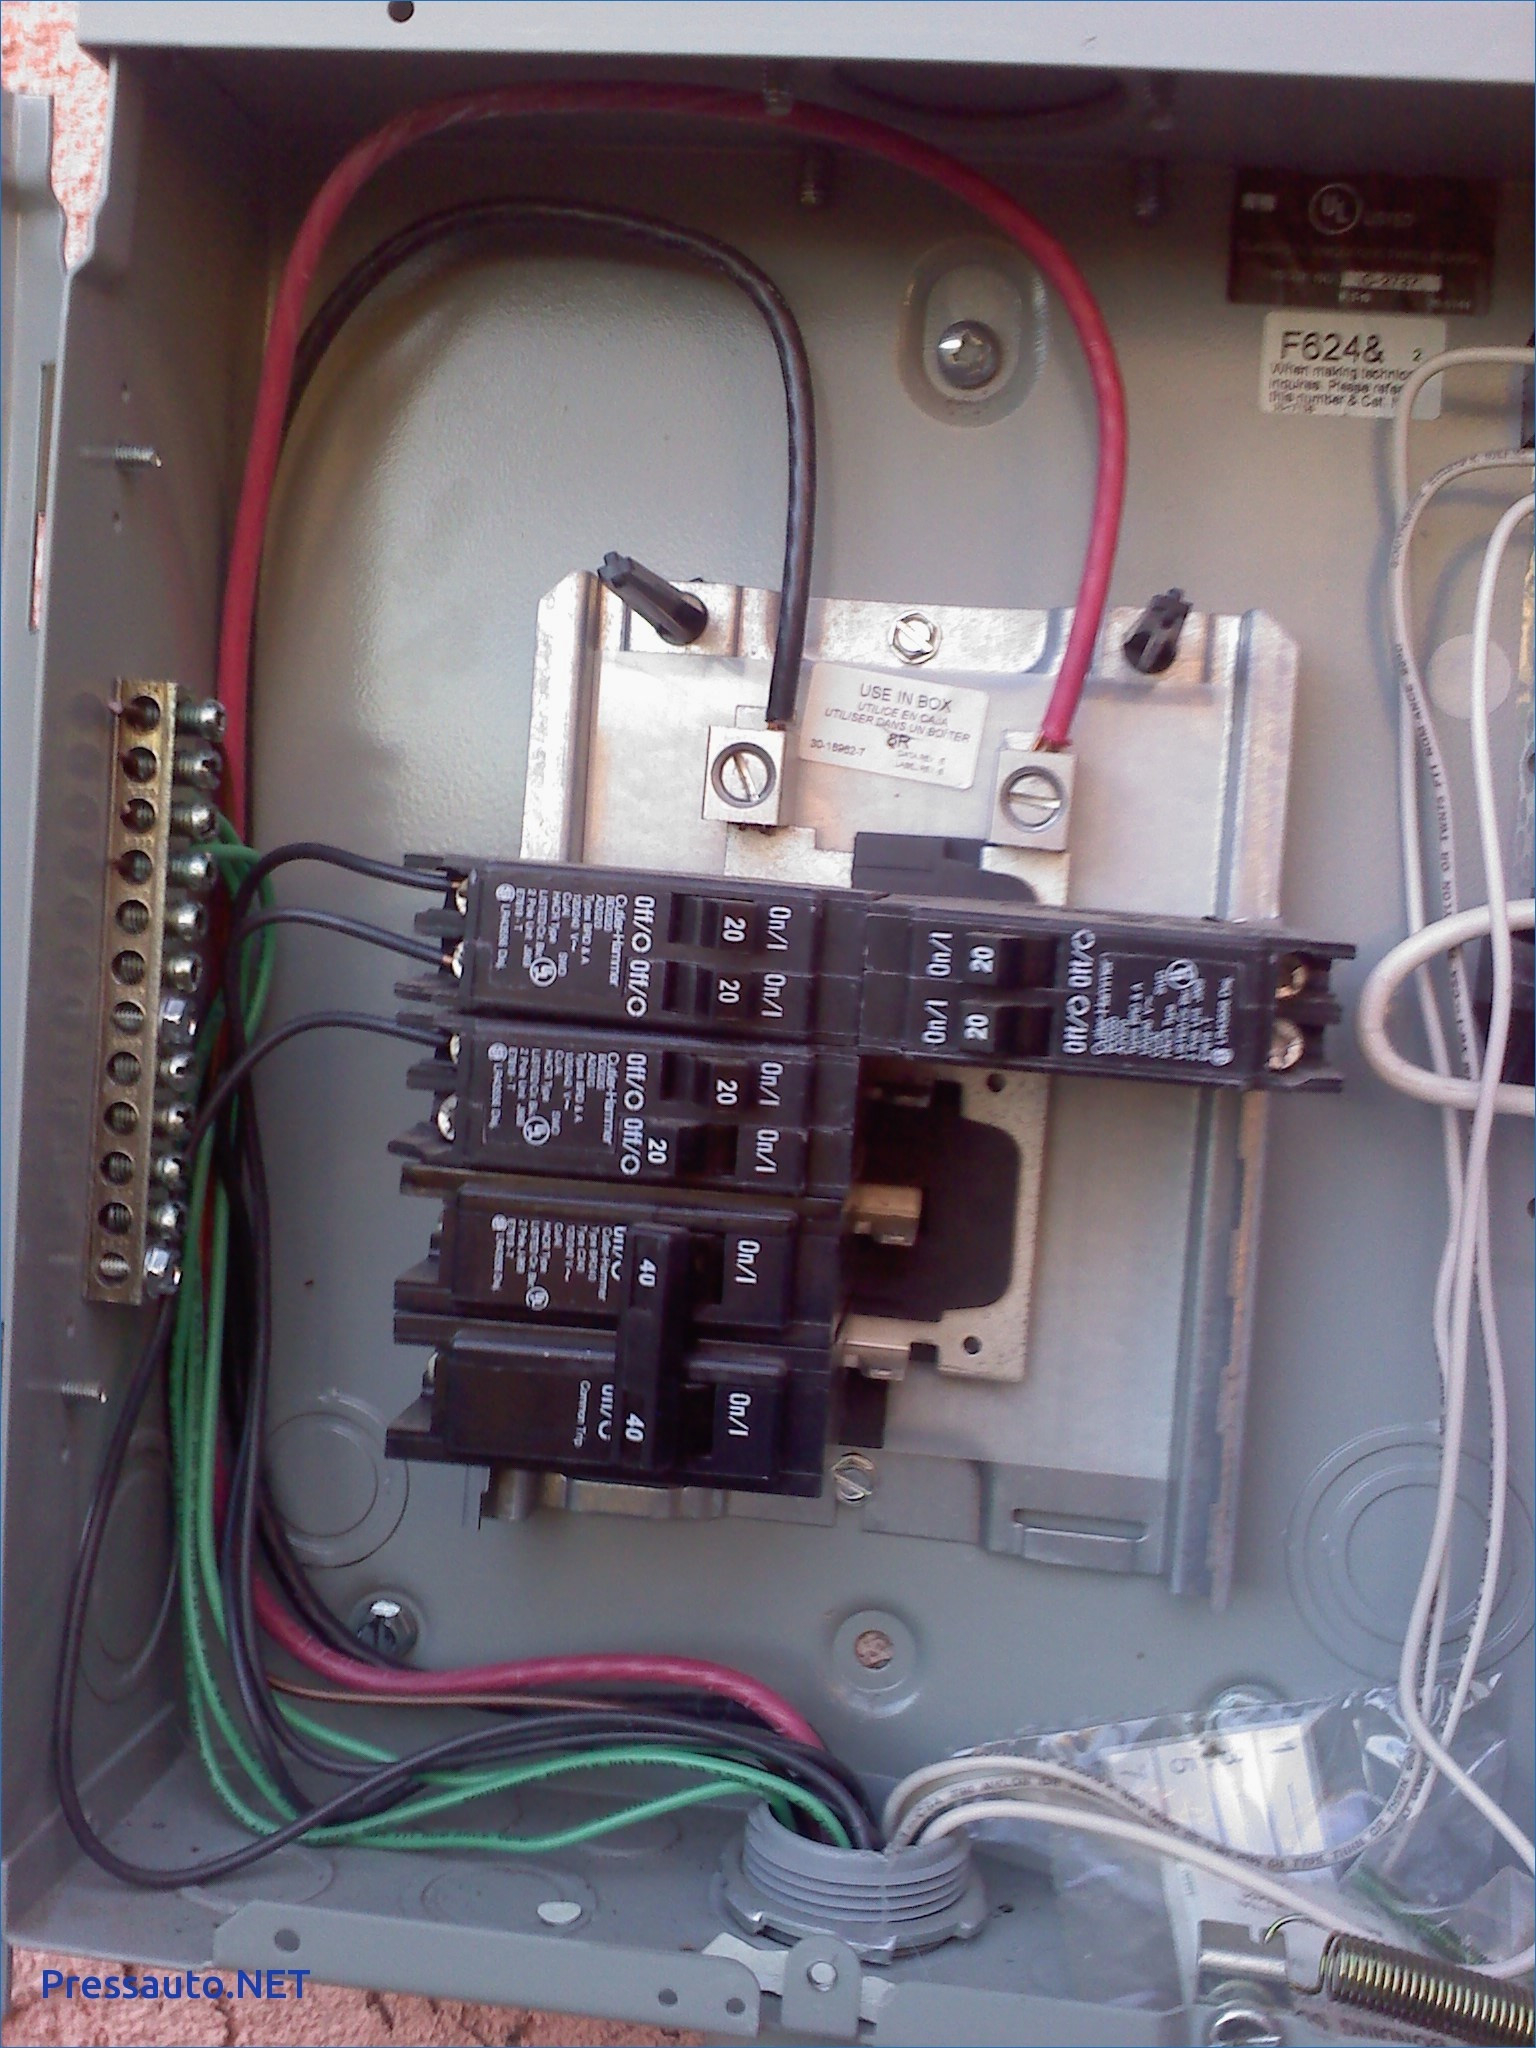 Square D 100 Amp Panel Wiring Diagram Collection | Wiring ...